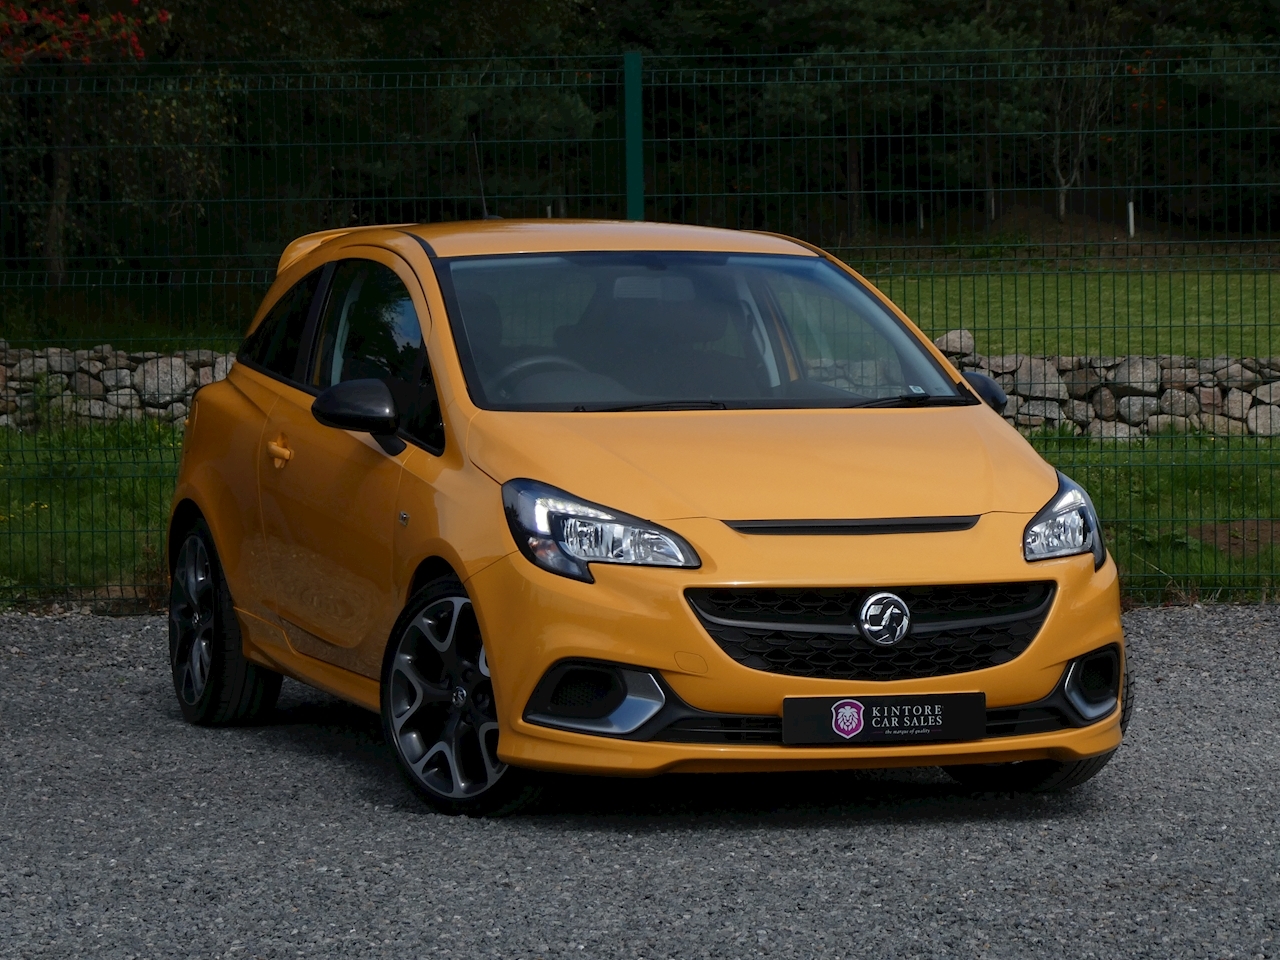 Used 2018 Vauxhall Corsa GSi 1.4i Turbo ecoTEC For Sale in